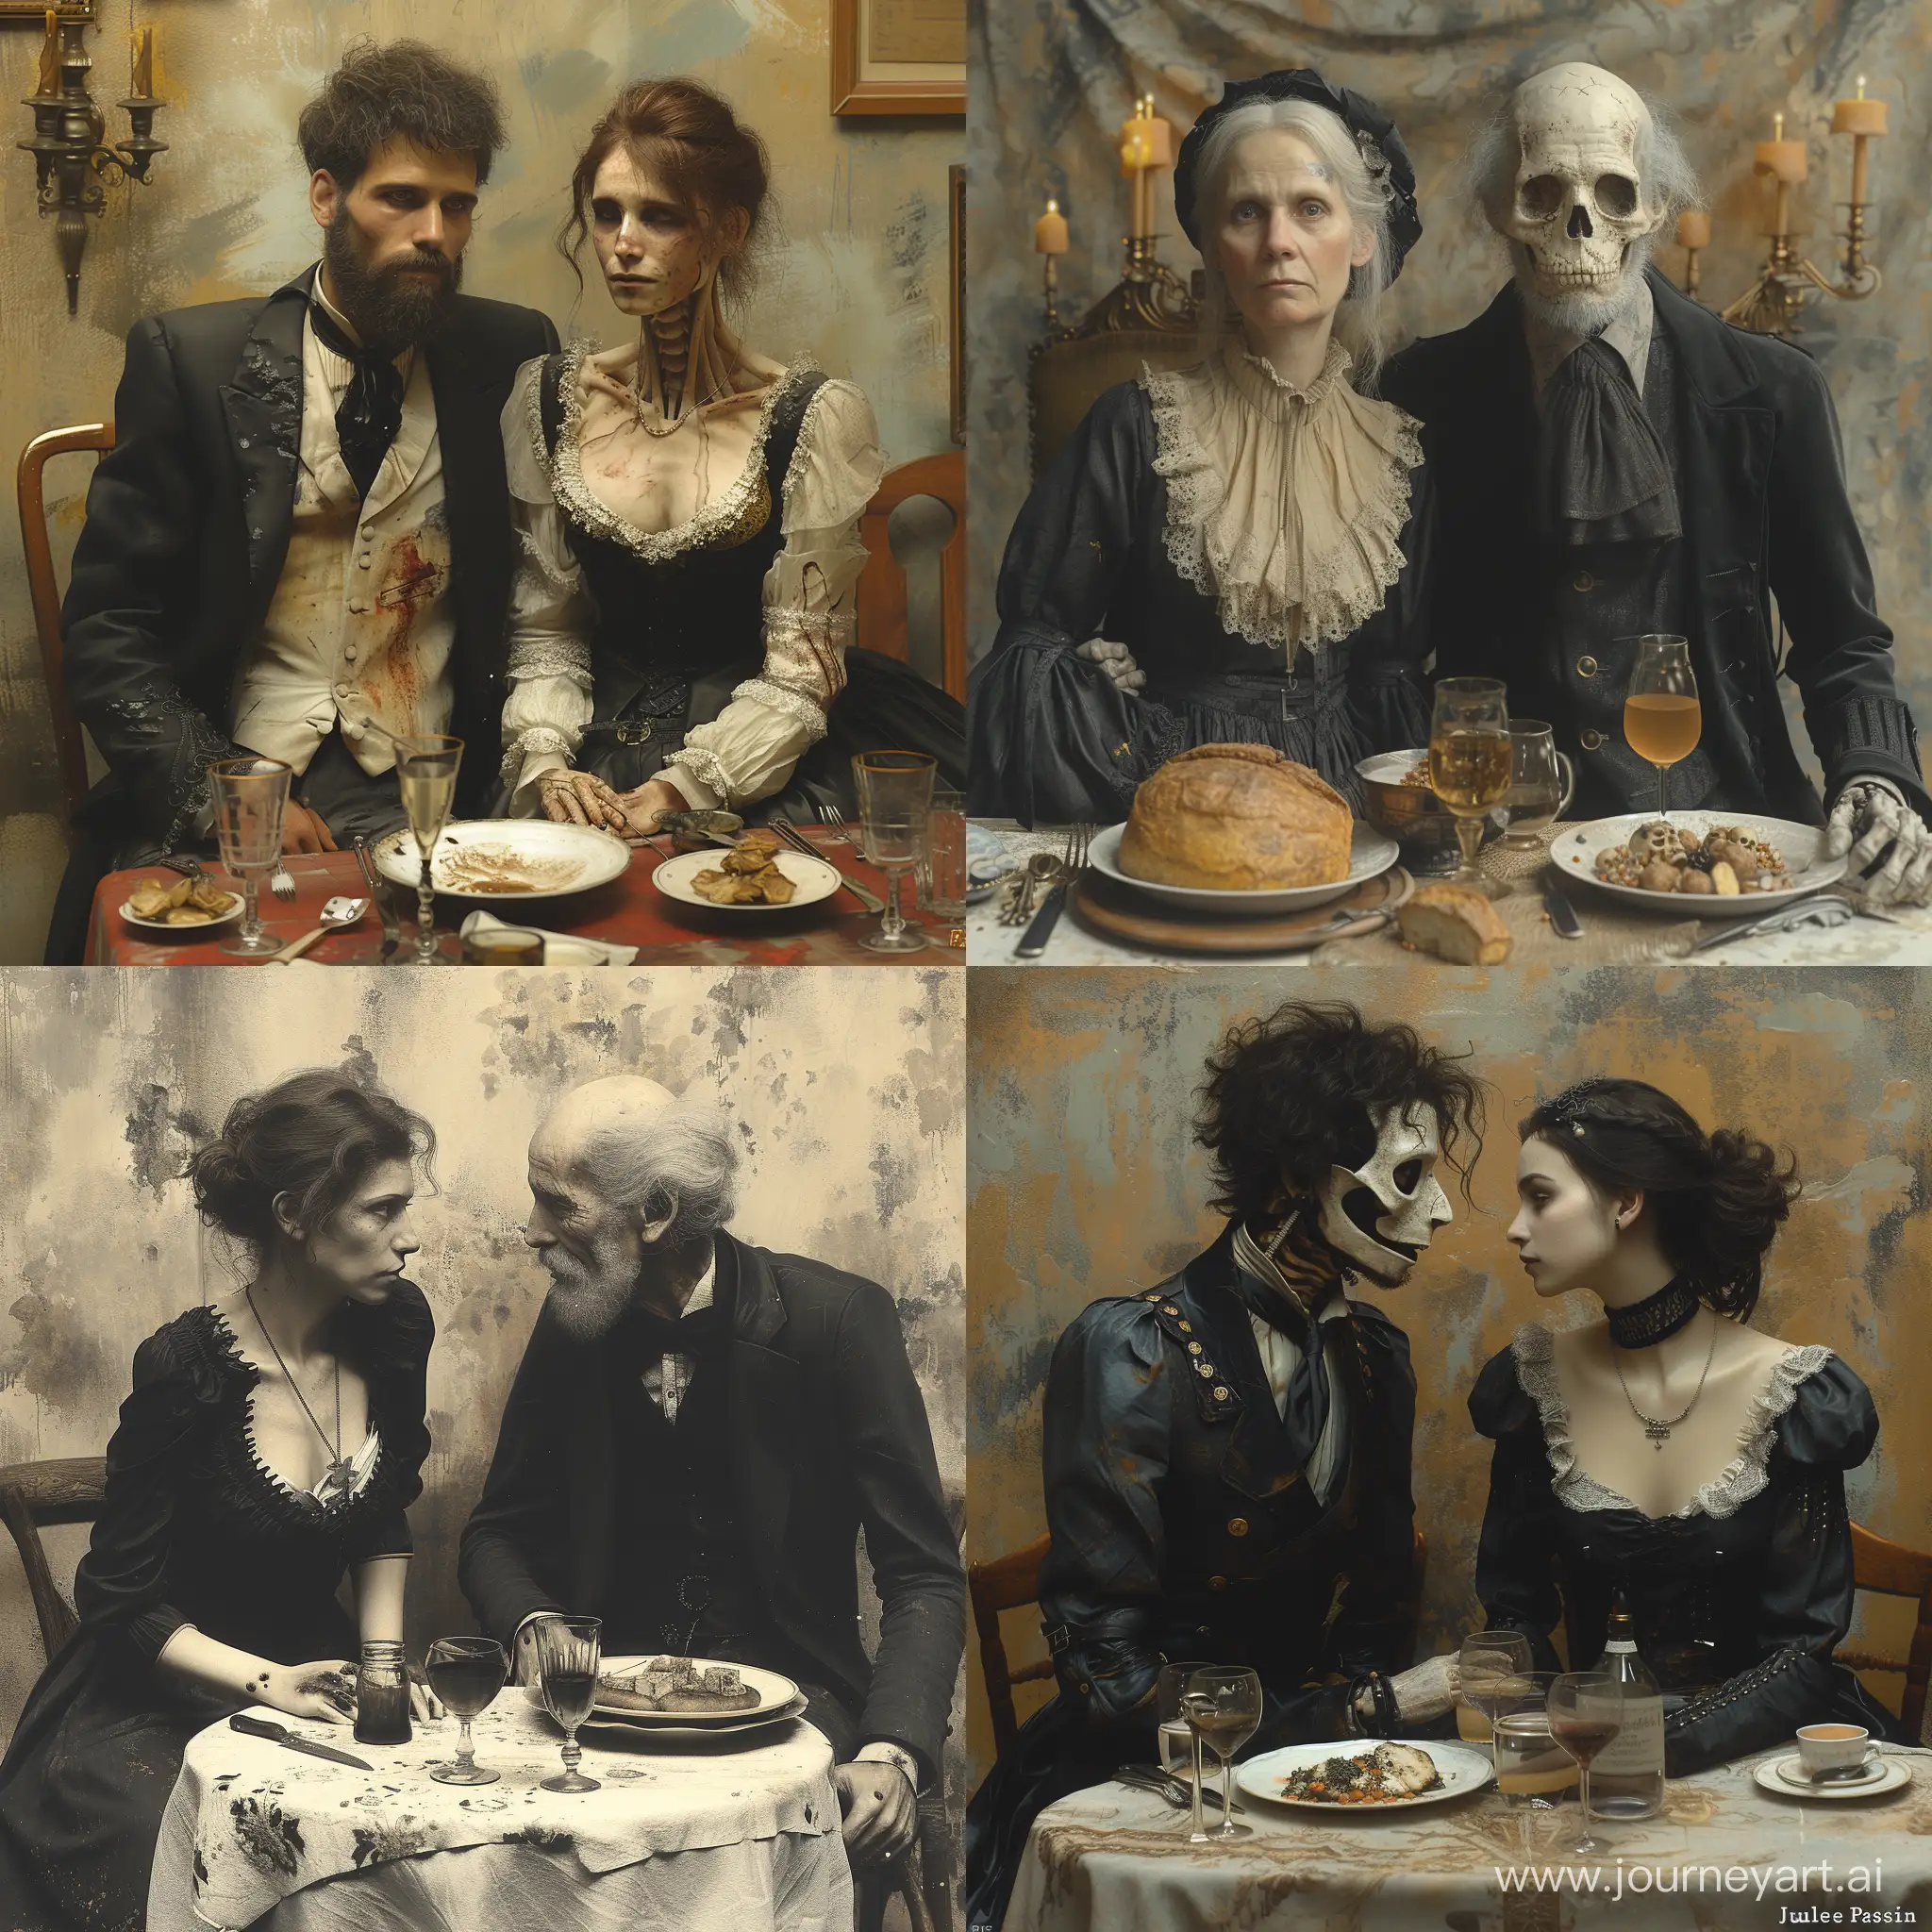 Biopunk-Mennonite-Couple-Dining-with-Guilty-Expressions-in-Sepia